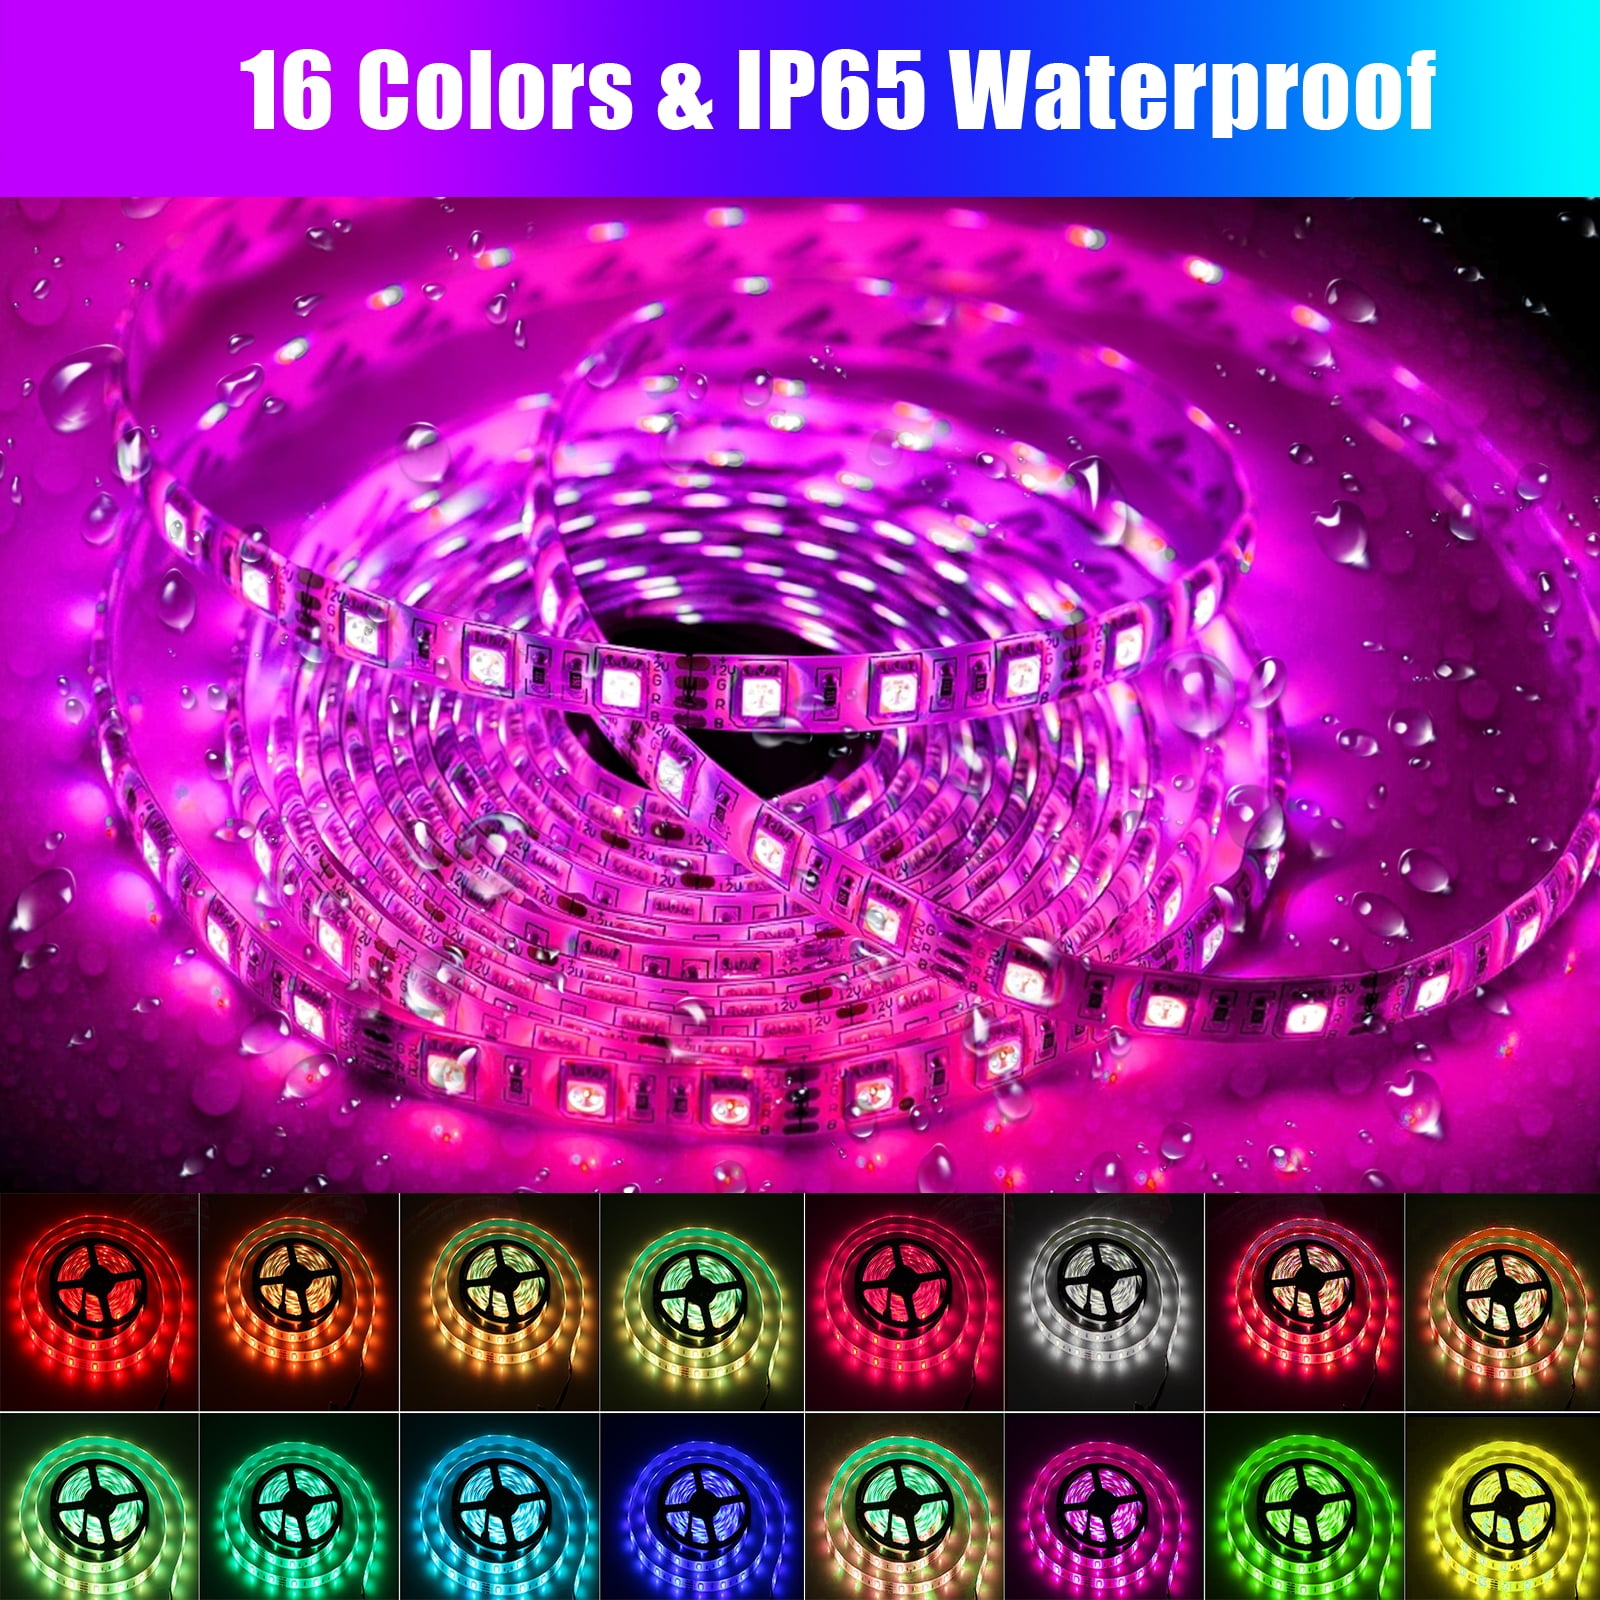 RGB LED Strip Lights Battery Operated RGB SMD5050 IP67 Waterproof Rope  Lights Color Changing Flexible LED Strip Kit For Home Bedroom Party From  Sunwaylighting, $10.46